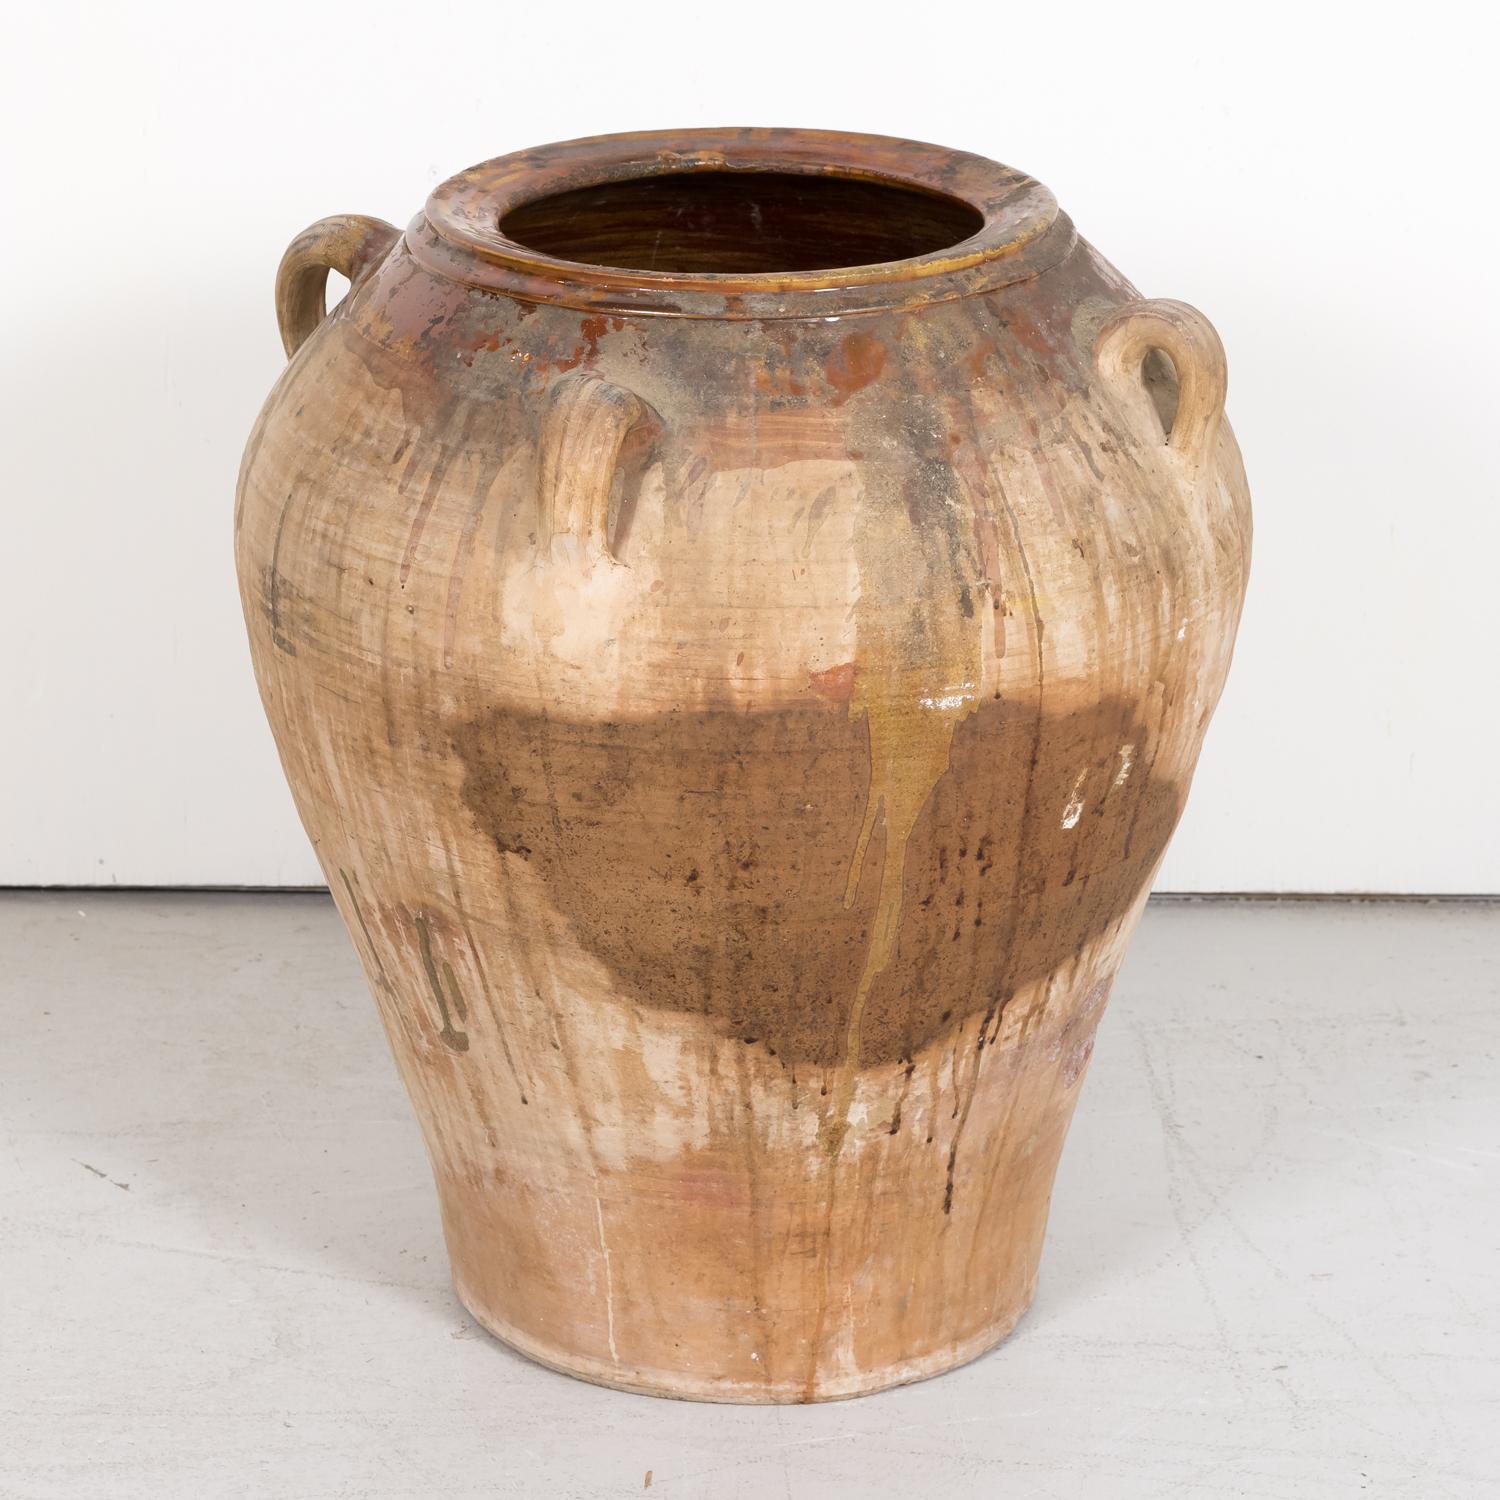 A large 19th century traditional Spanish terracotta orza or olive jar handmade in the province of Tarragona in Catalonia, circa 1890s, having four handles and an unglazed exterior with the neck, rim, and interior glazed. Used to preserve olive oil,